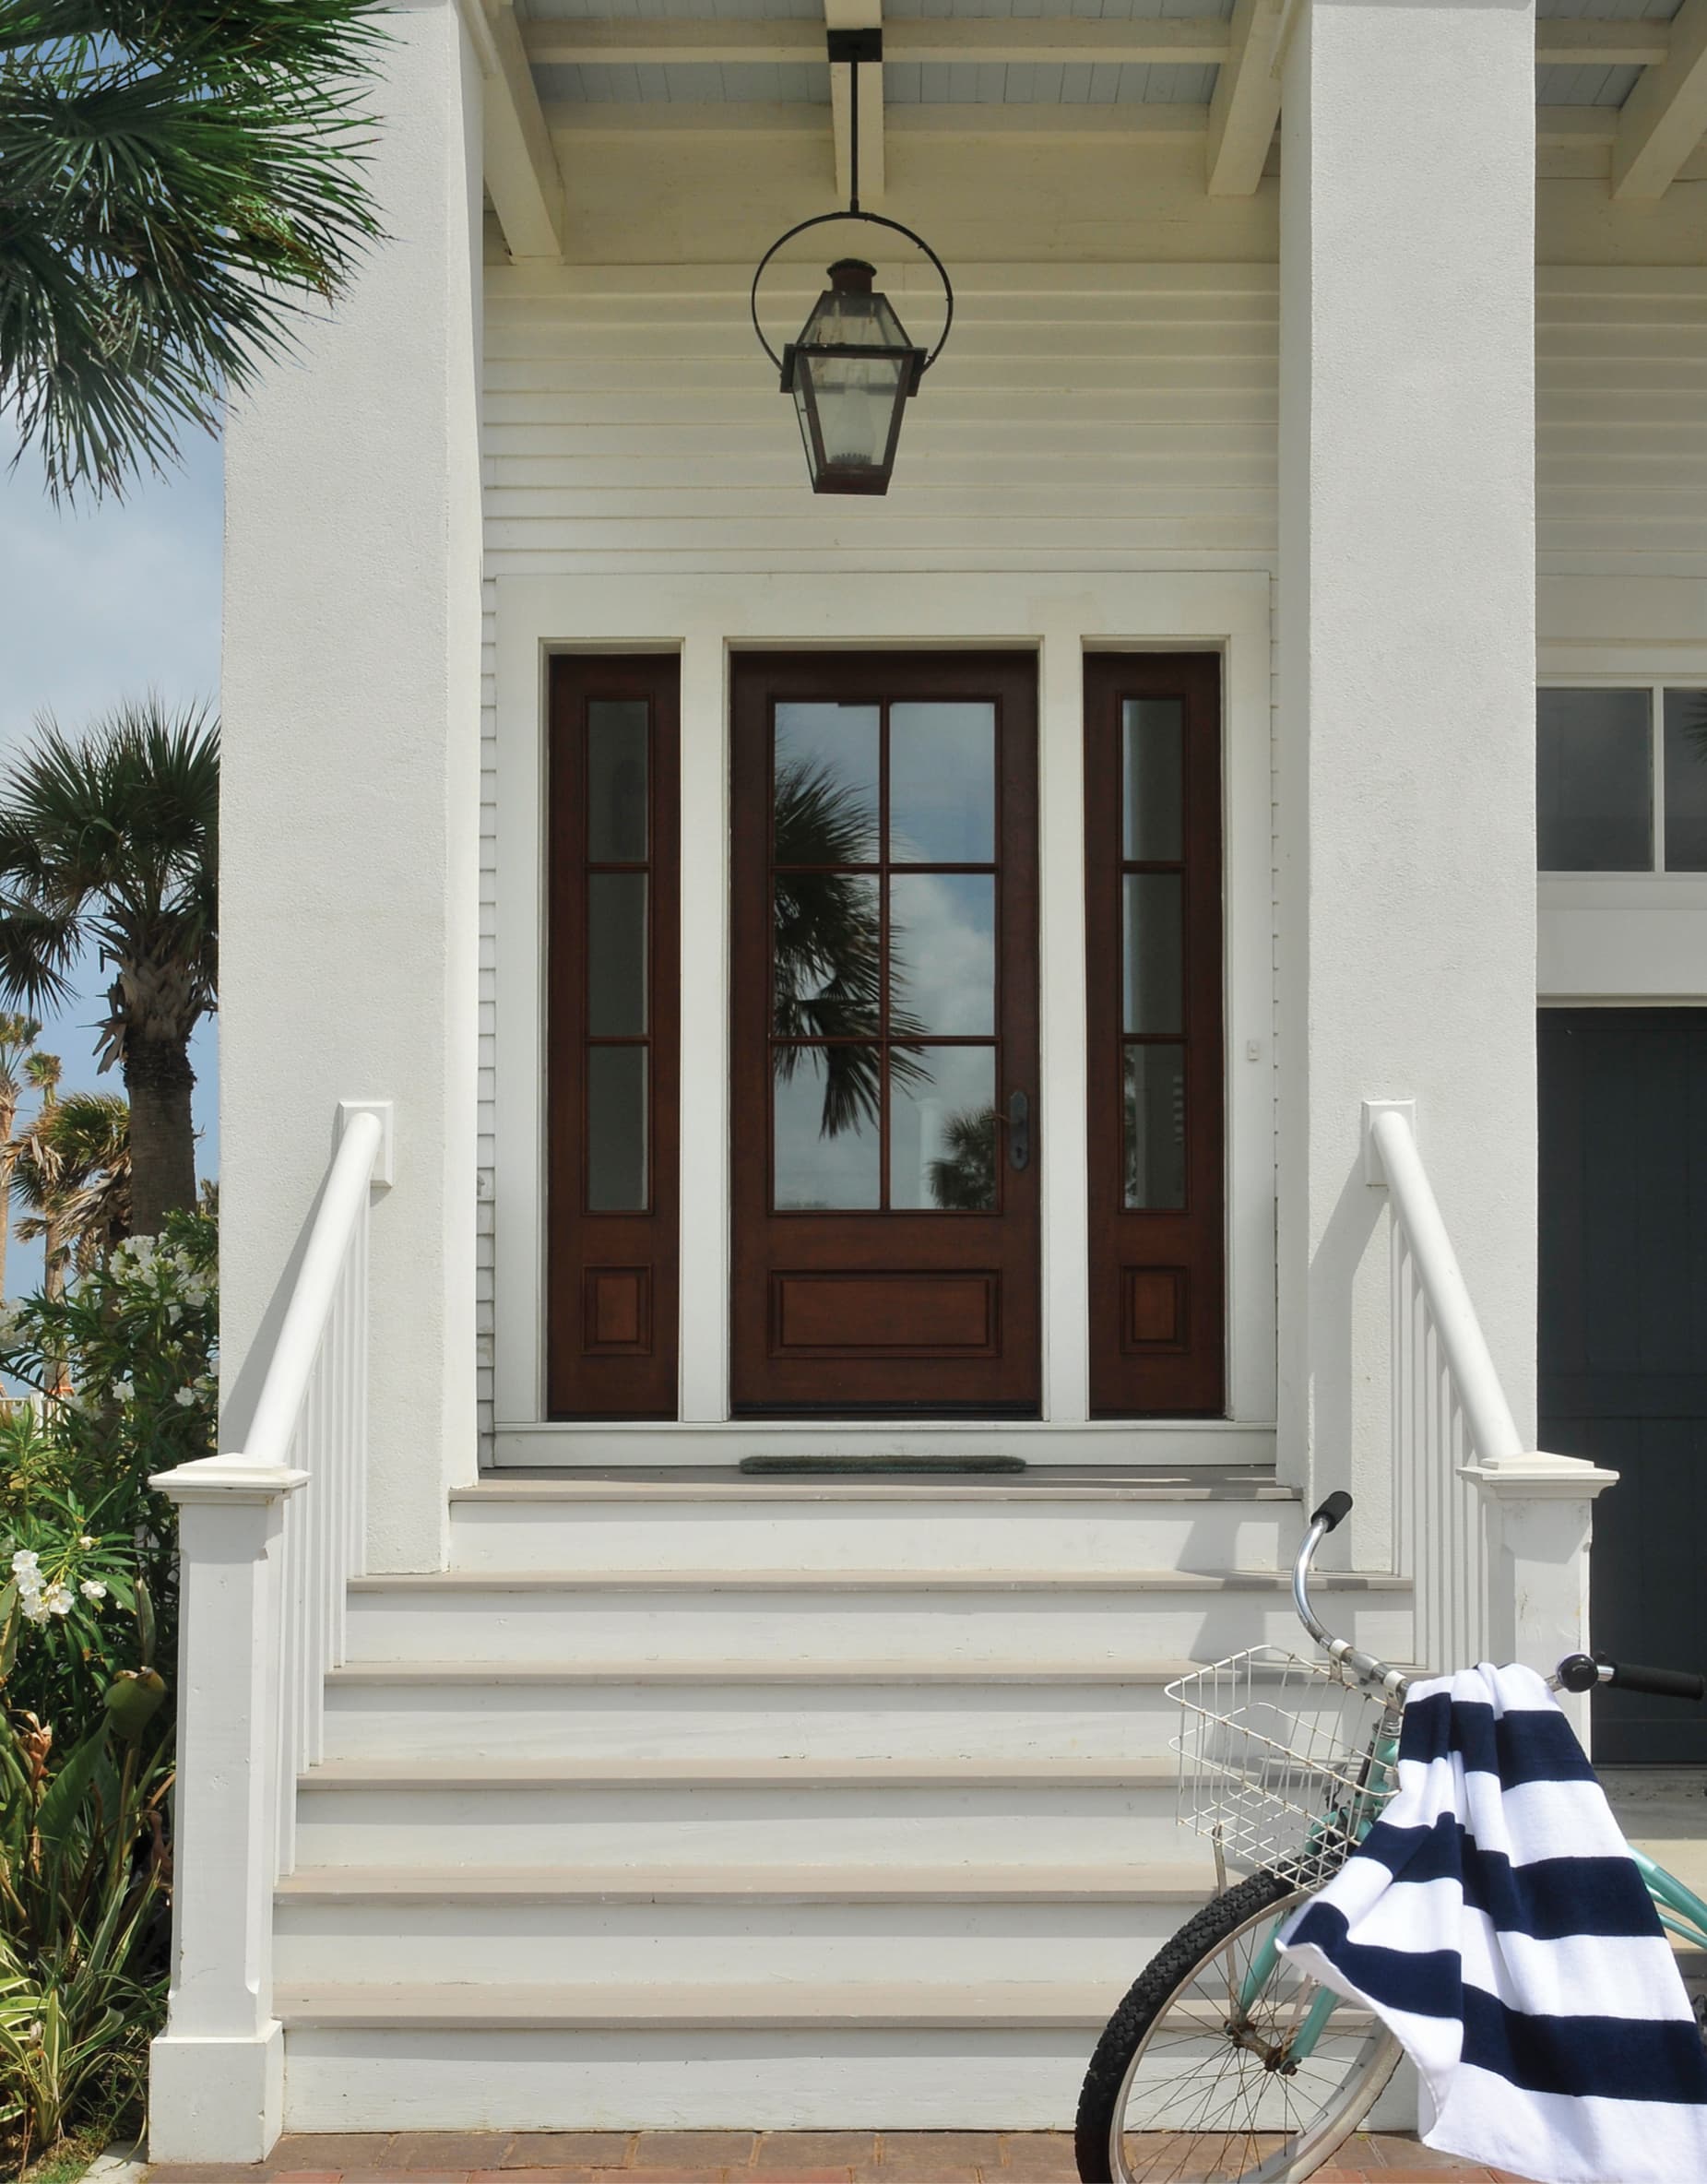 Porch staircase leading to door